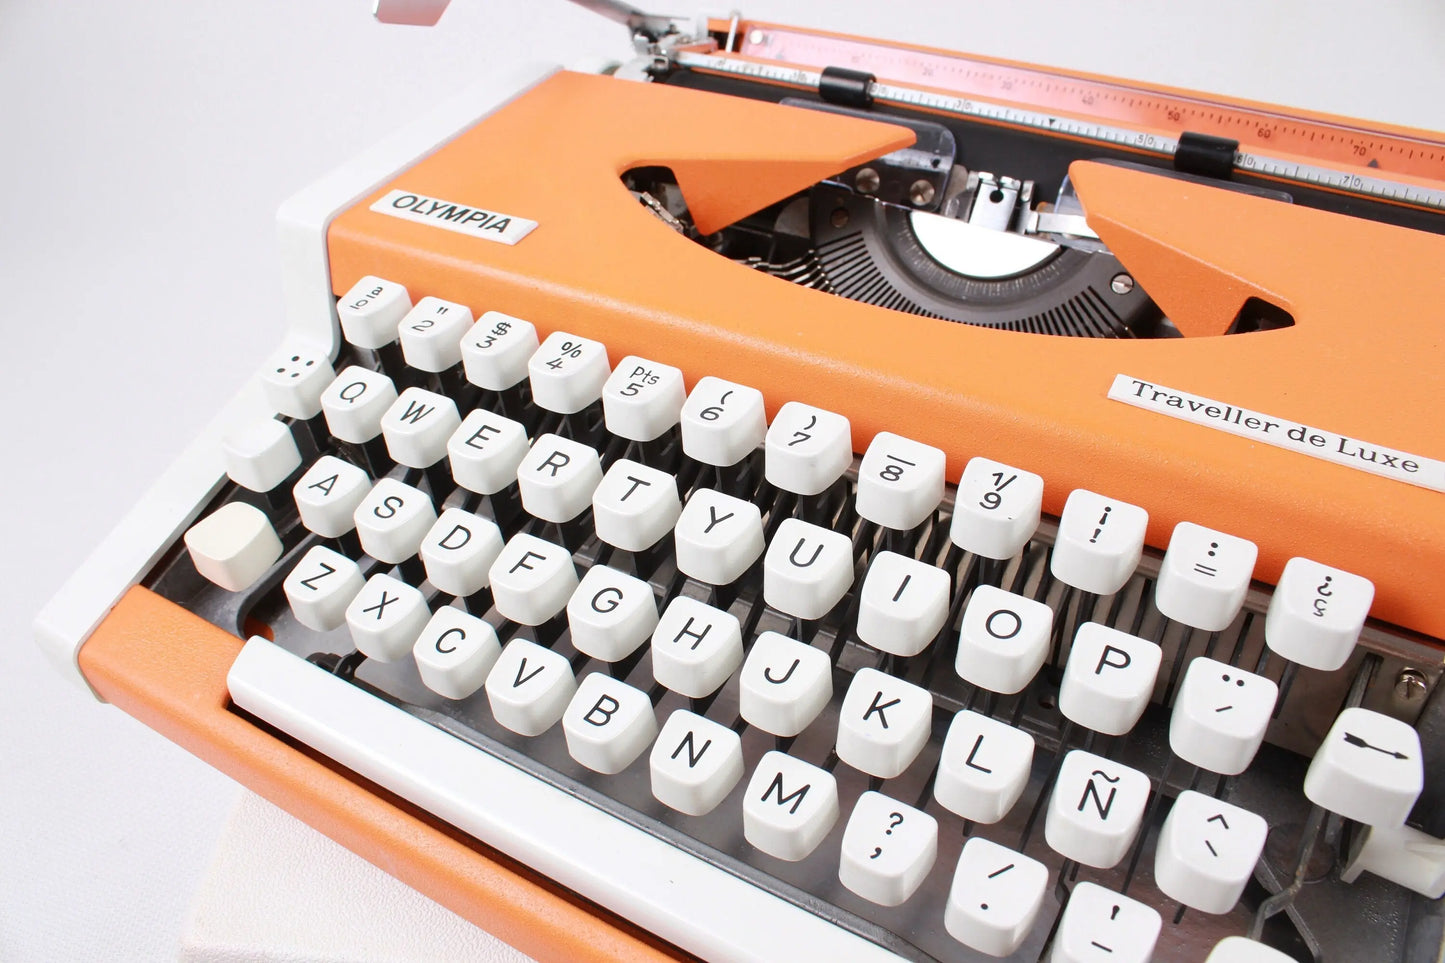 Olympia Traveller De Luxe Orange Typewriter, Vintage, Manual Portable, Professionally Serviced by Typewriter.Company - ElGranero Typewriter.Company